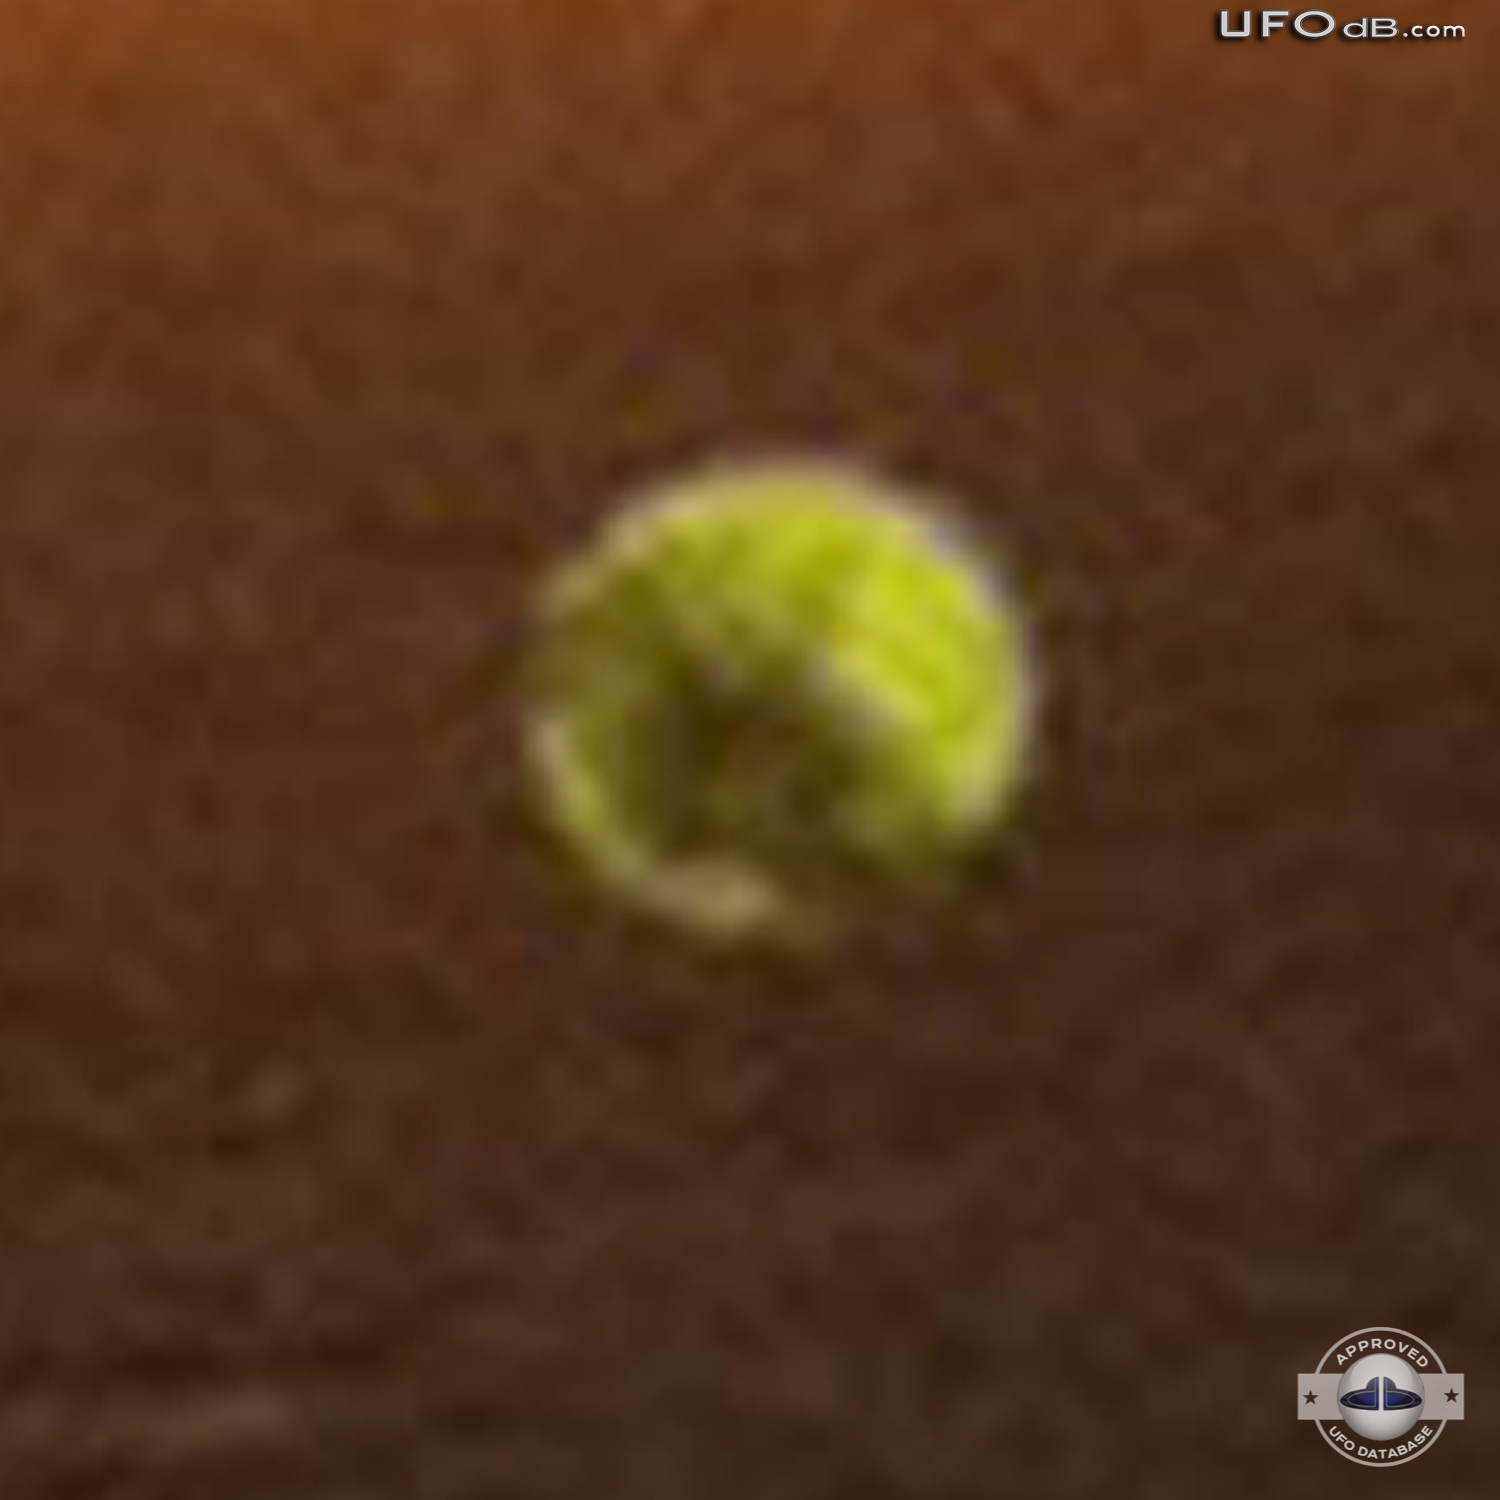 Green Sphere UFO caught on picture over the ocean | Miami Beach | 2011 UFO Picture #356-4